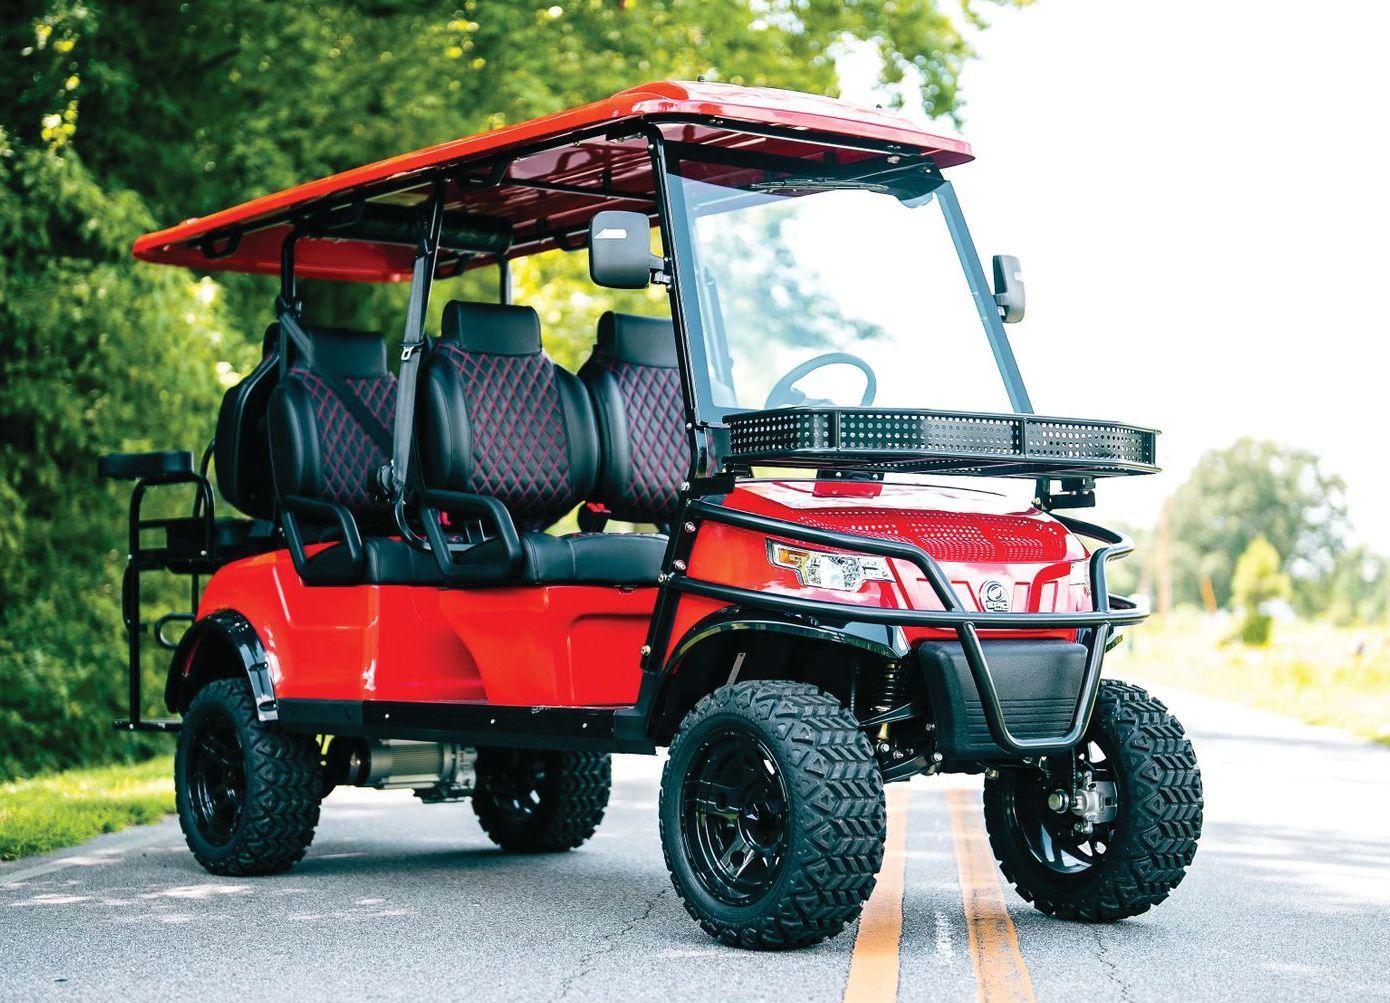 Red Epic 6-passenger golf cart on a two-lane road